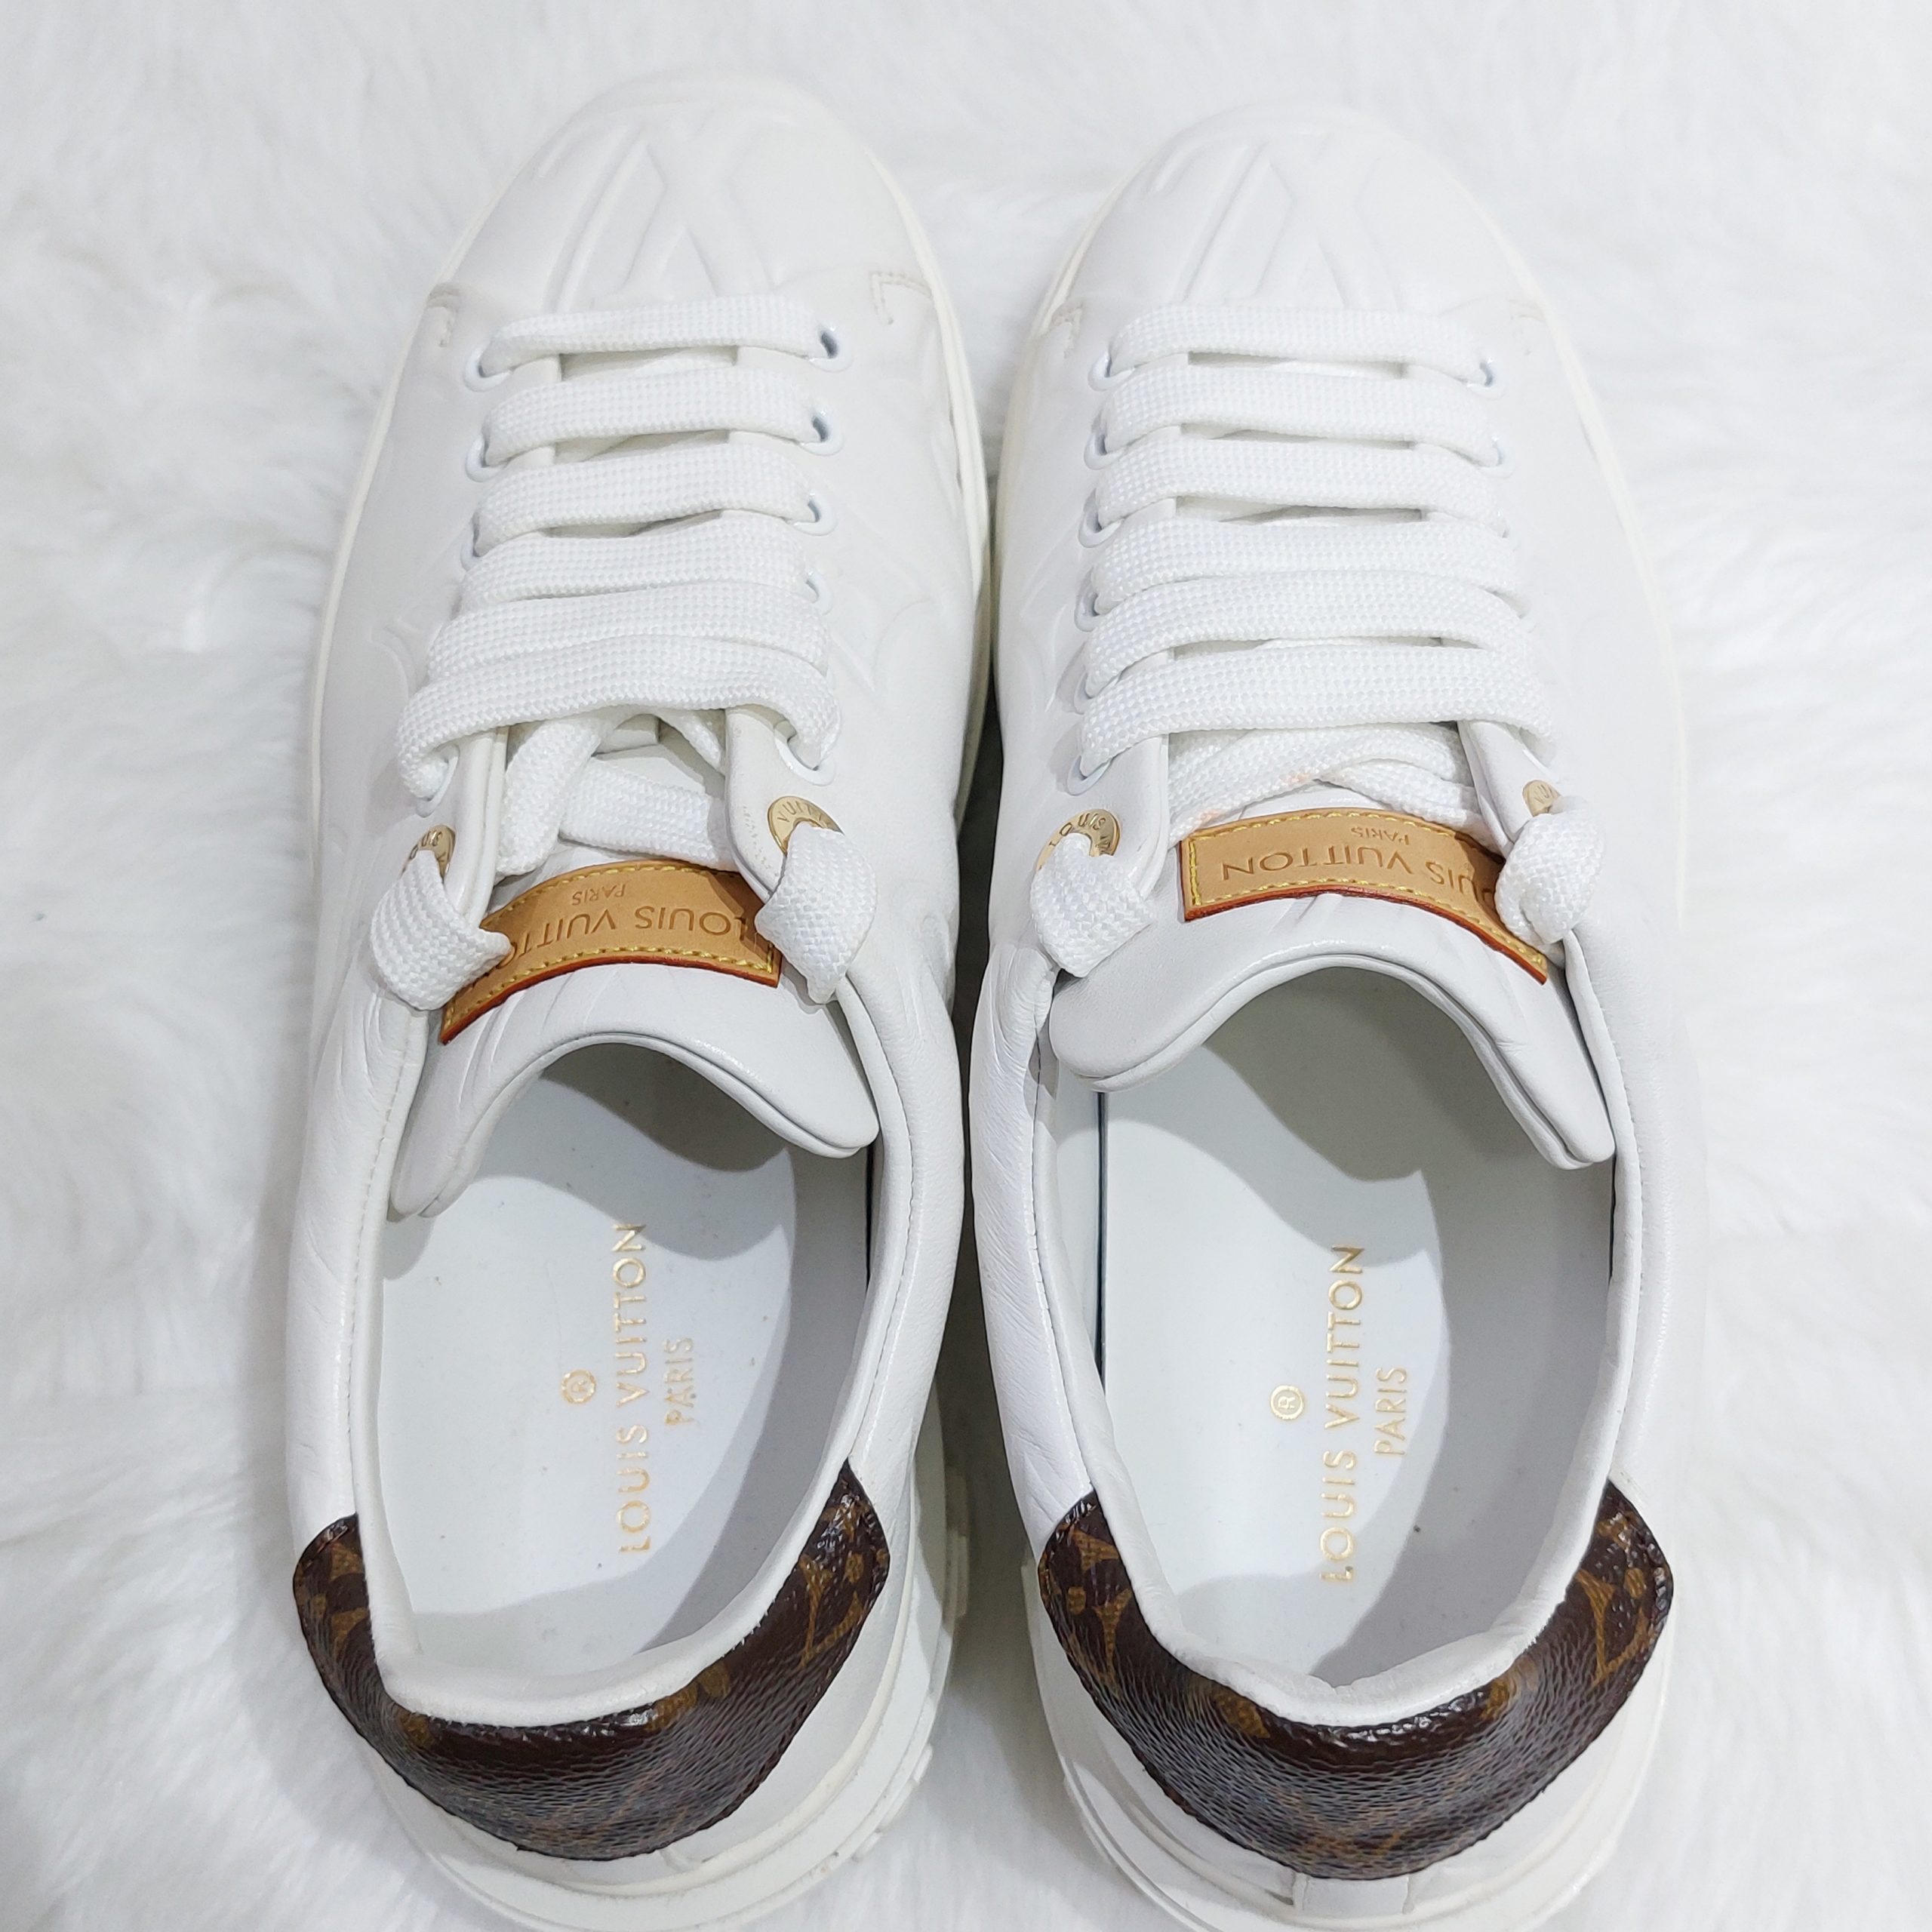 LOUIS VUITTON Lambskin Embossed Monogram Time Out Sneakers 40.5 White  480982